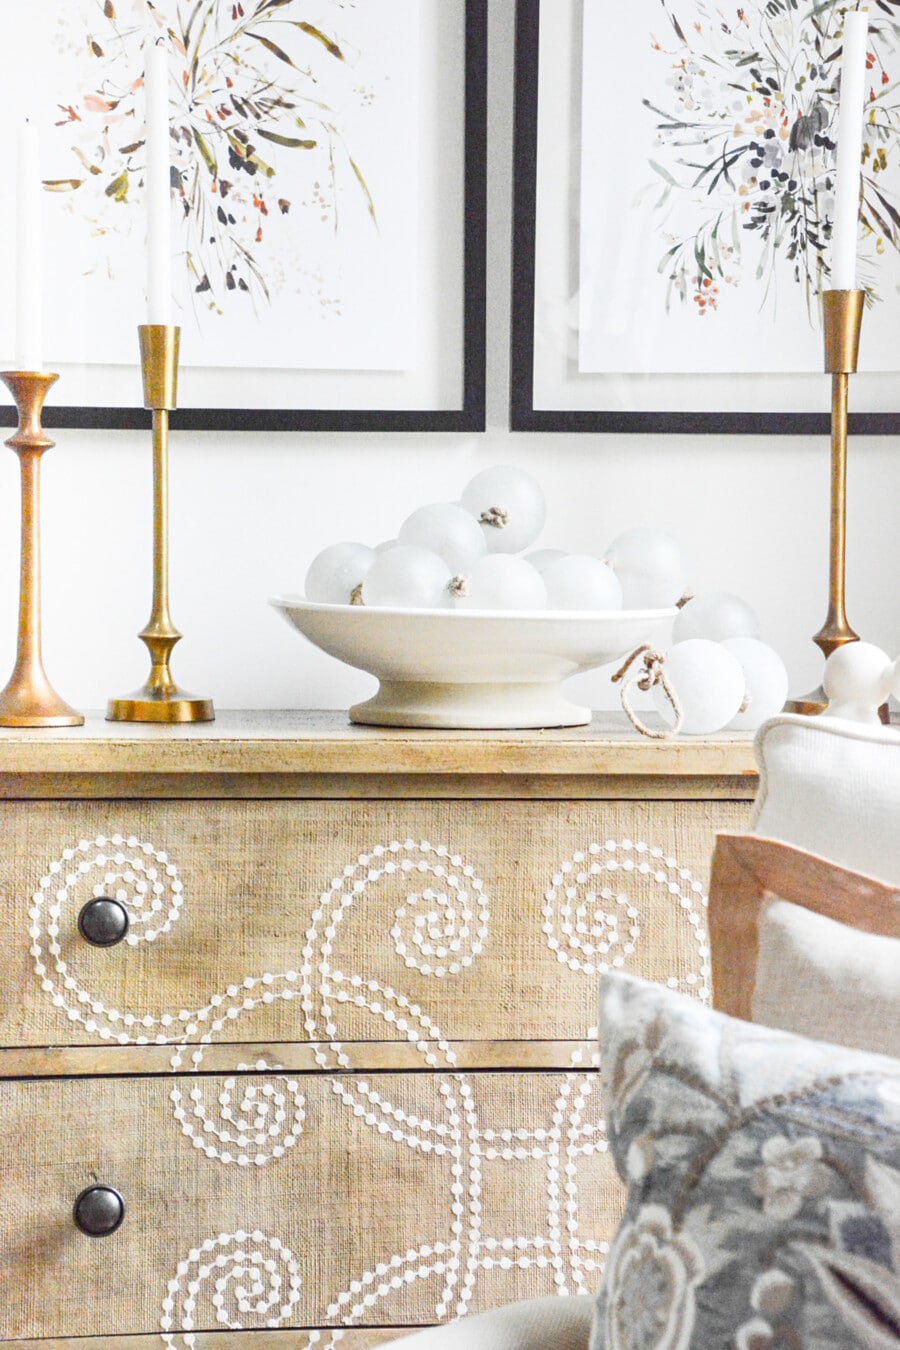 7 Designer Tips For Decorating With Neutrals